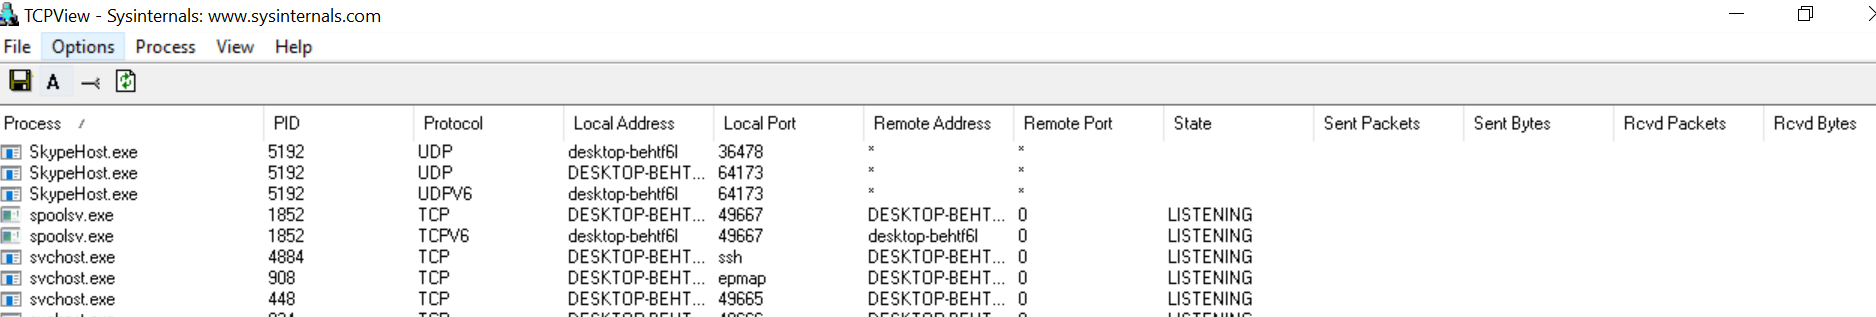 tcpview showing ports used by process